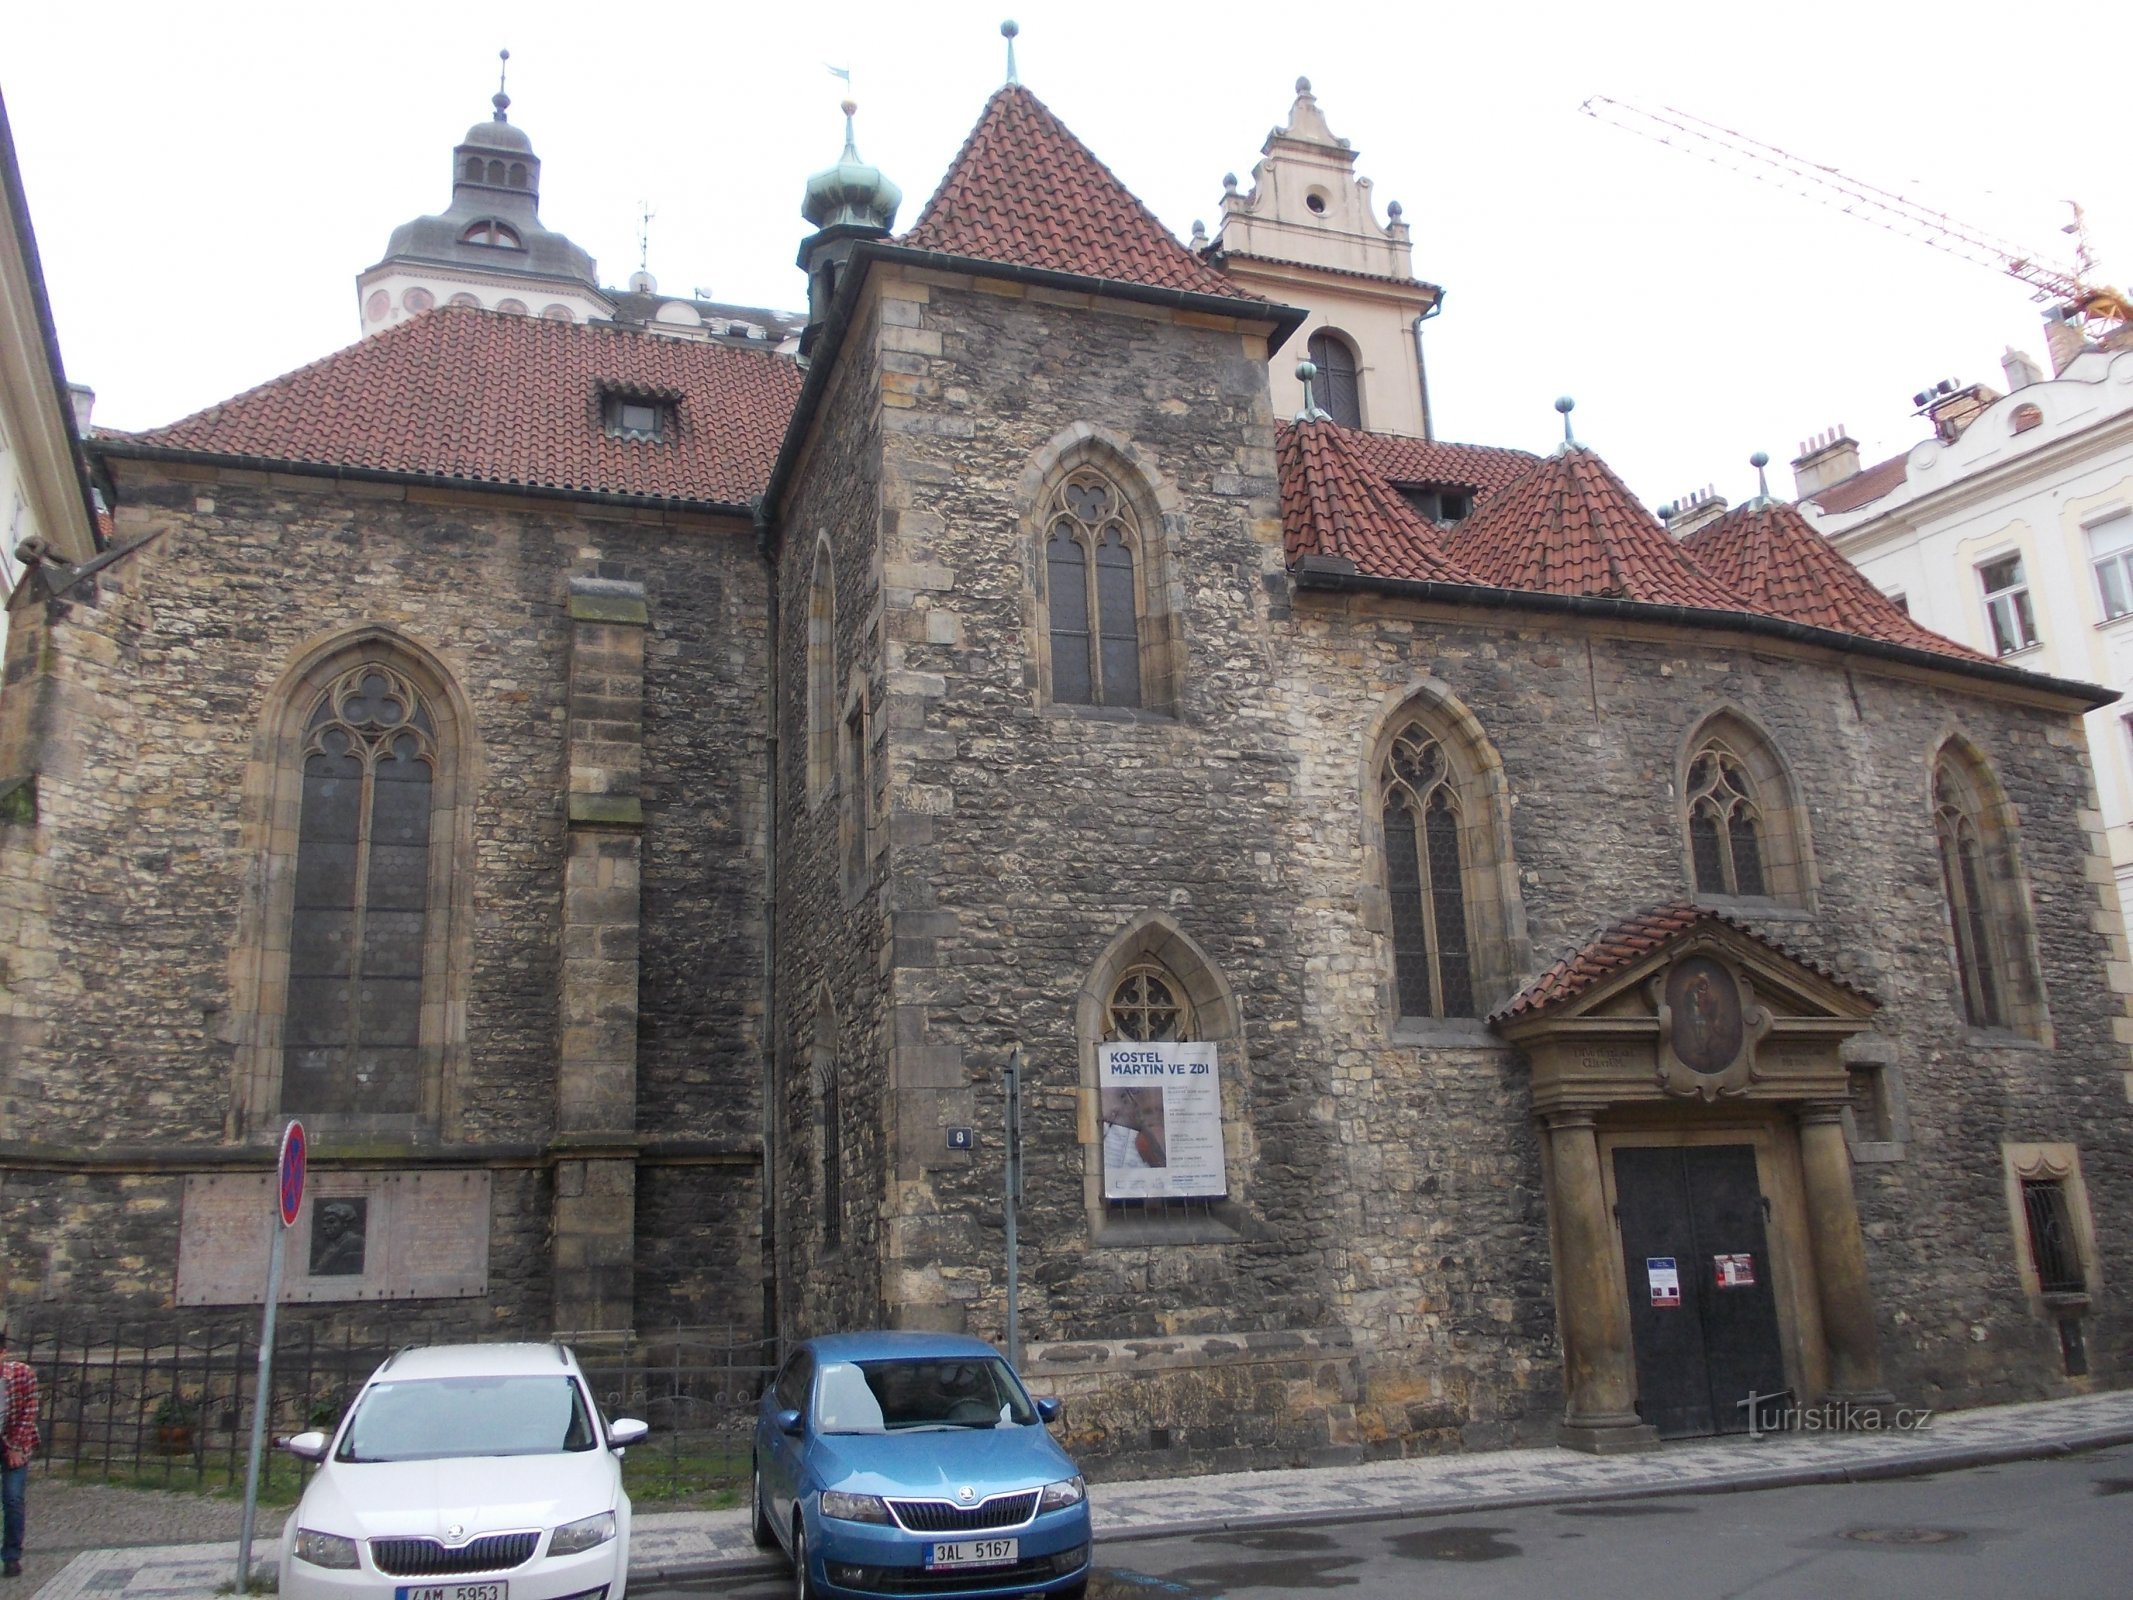 church of st. Martina in the wall between the buildings